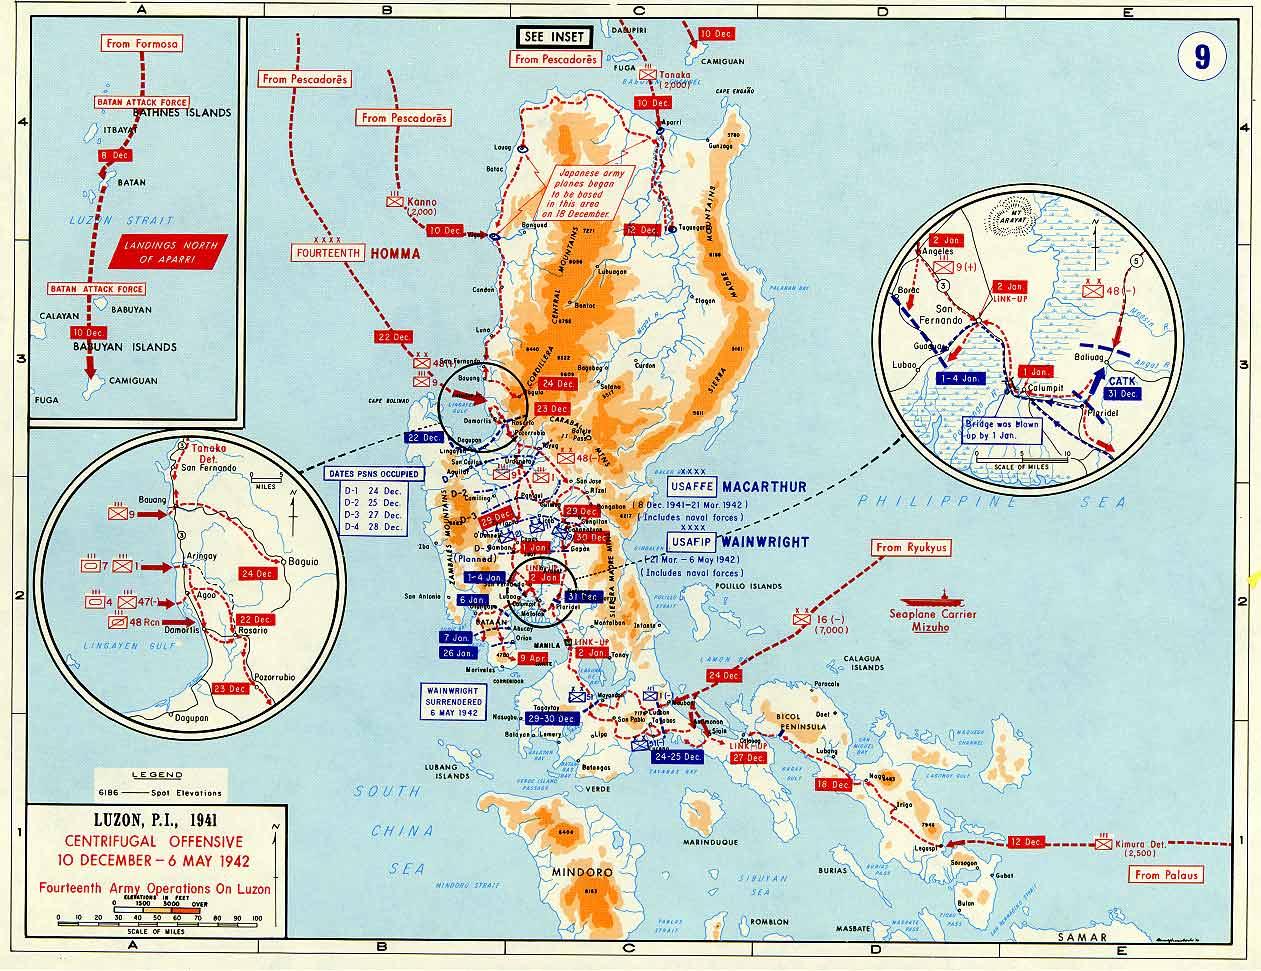 Map depicting the Japanese advance in Luzon, Philippine Islands, 10 Dec 1941-6 May 1942